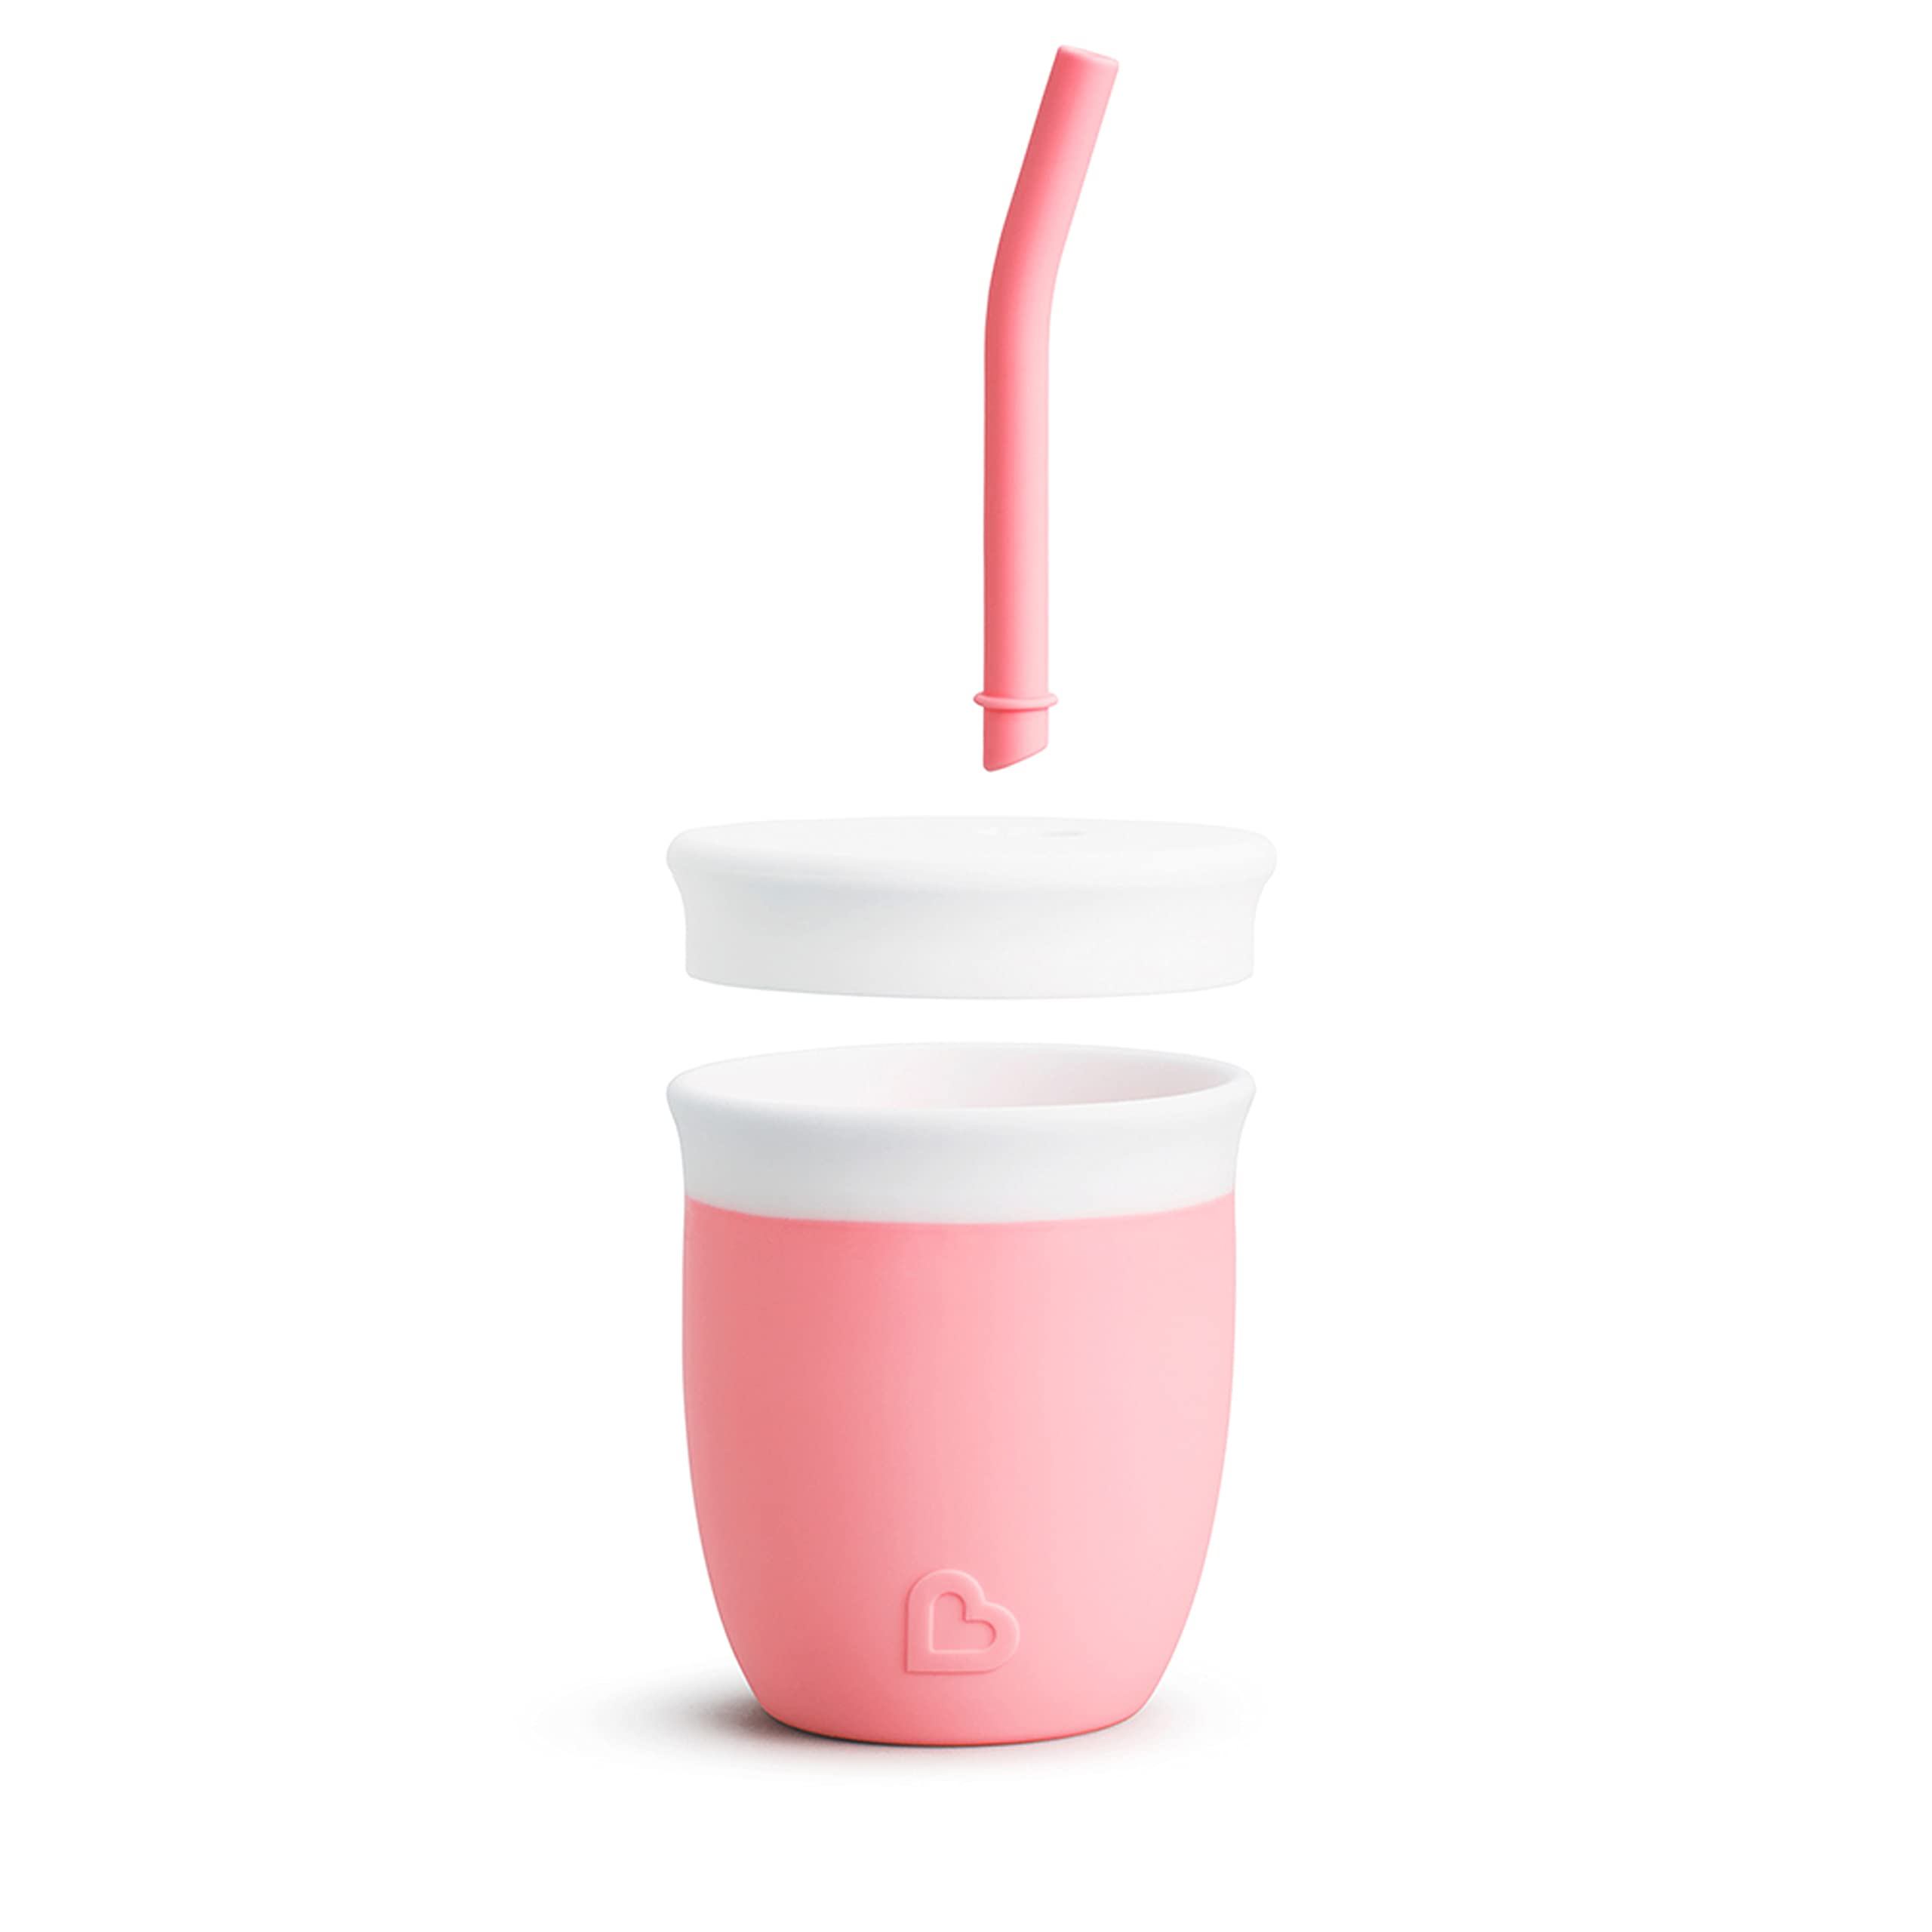 Munchkin C’est Silicone! Open Training Cup with Straw for Babies and Toddlers 6 Months+, 4 Ounce, 1 Pack, Coral